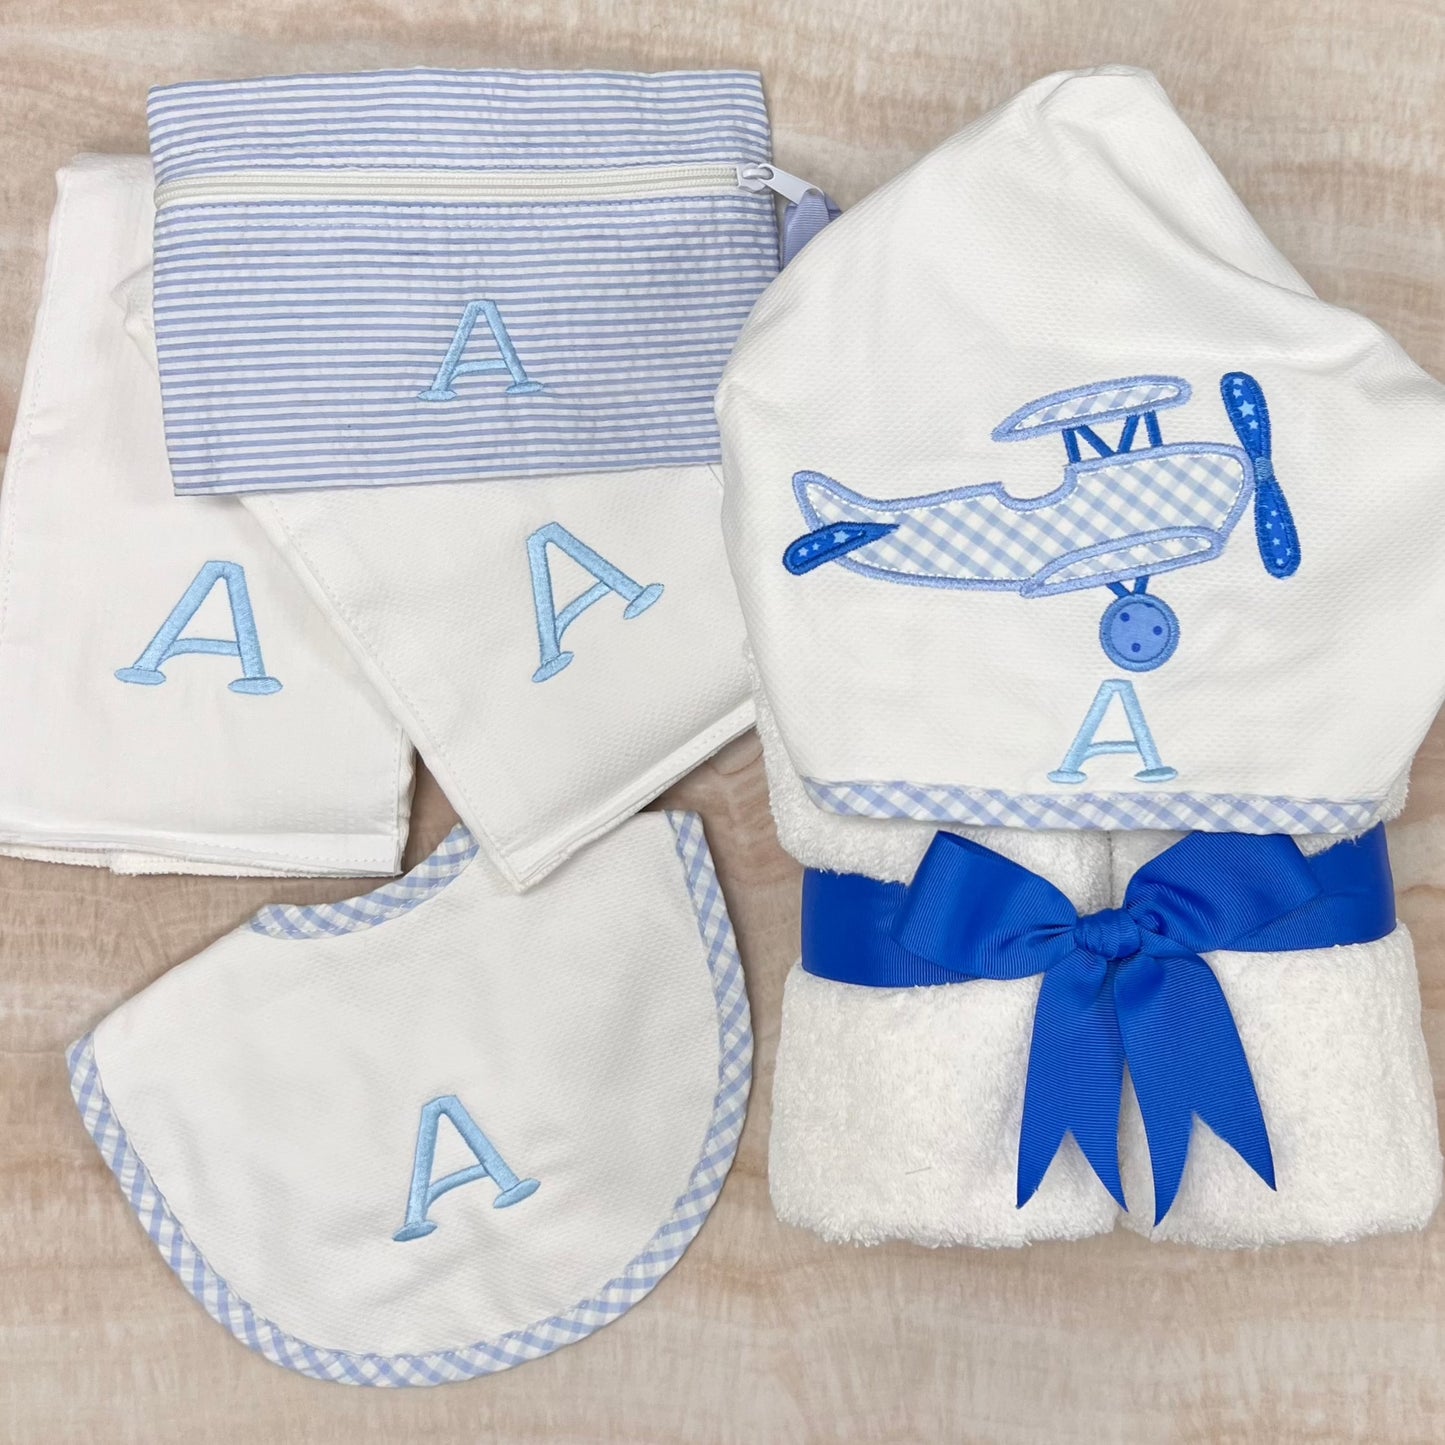 Personalized White Baby Set of 2 Burps - Give Wink